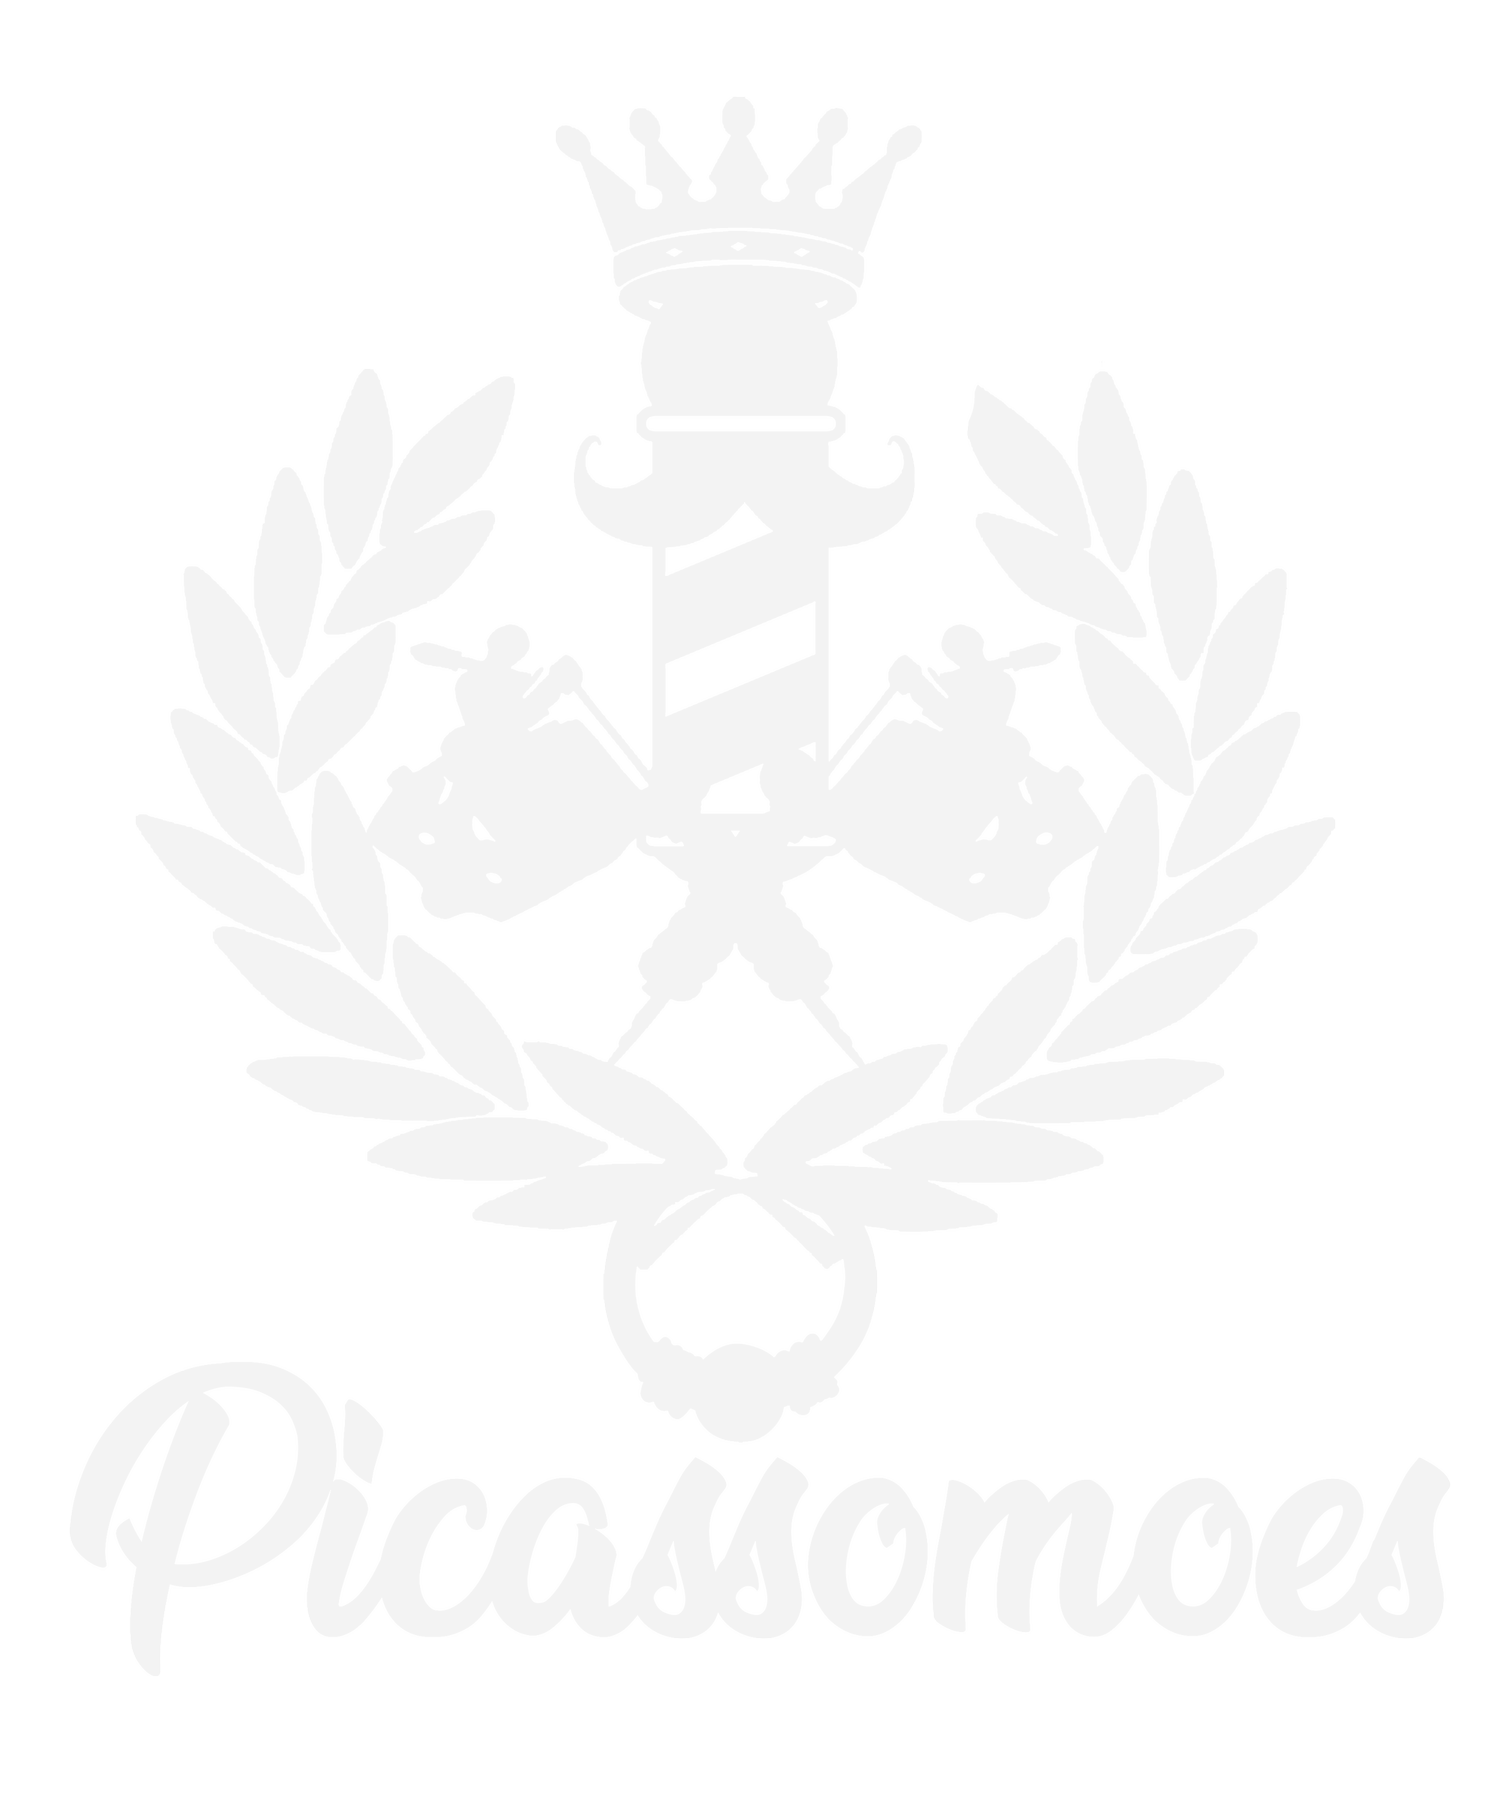 Picassomoes